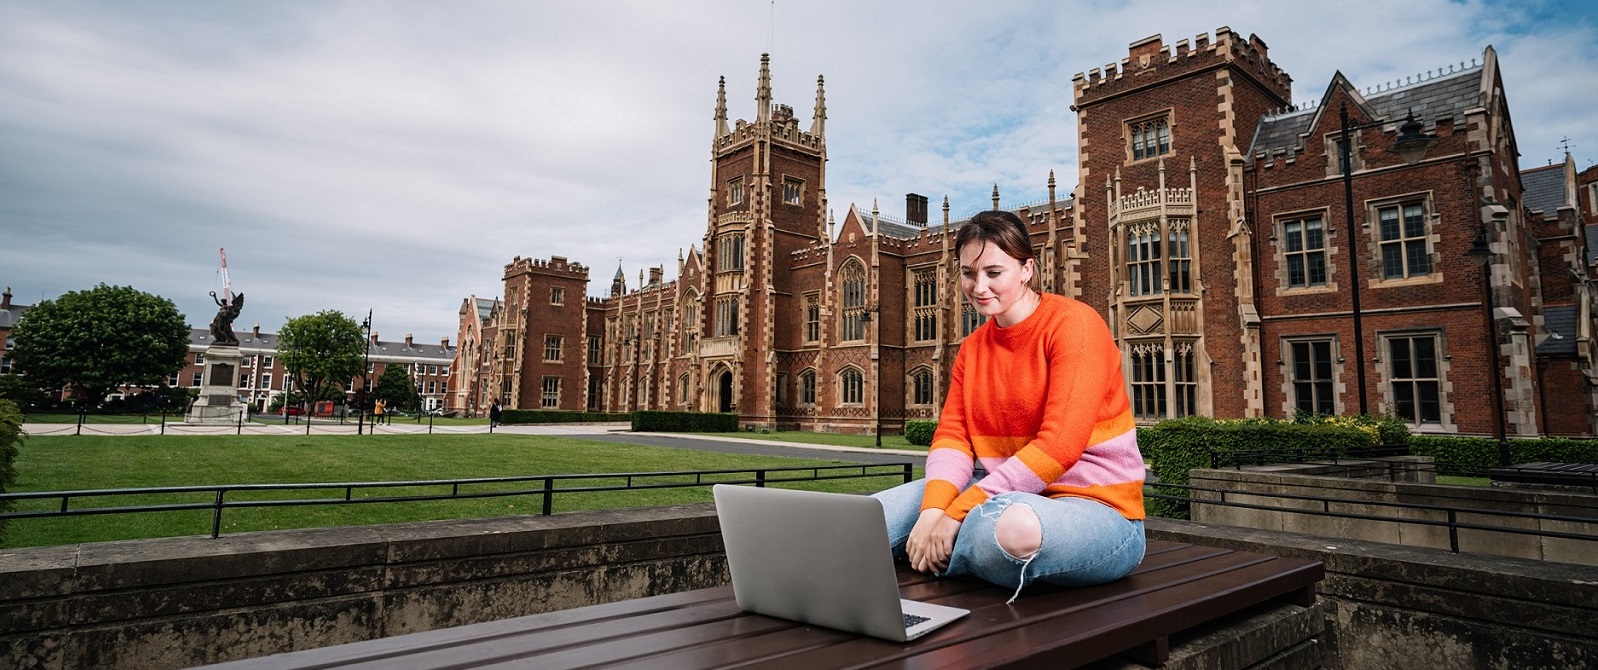 Student at laptop in front of building